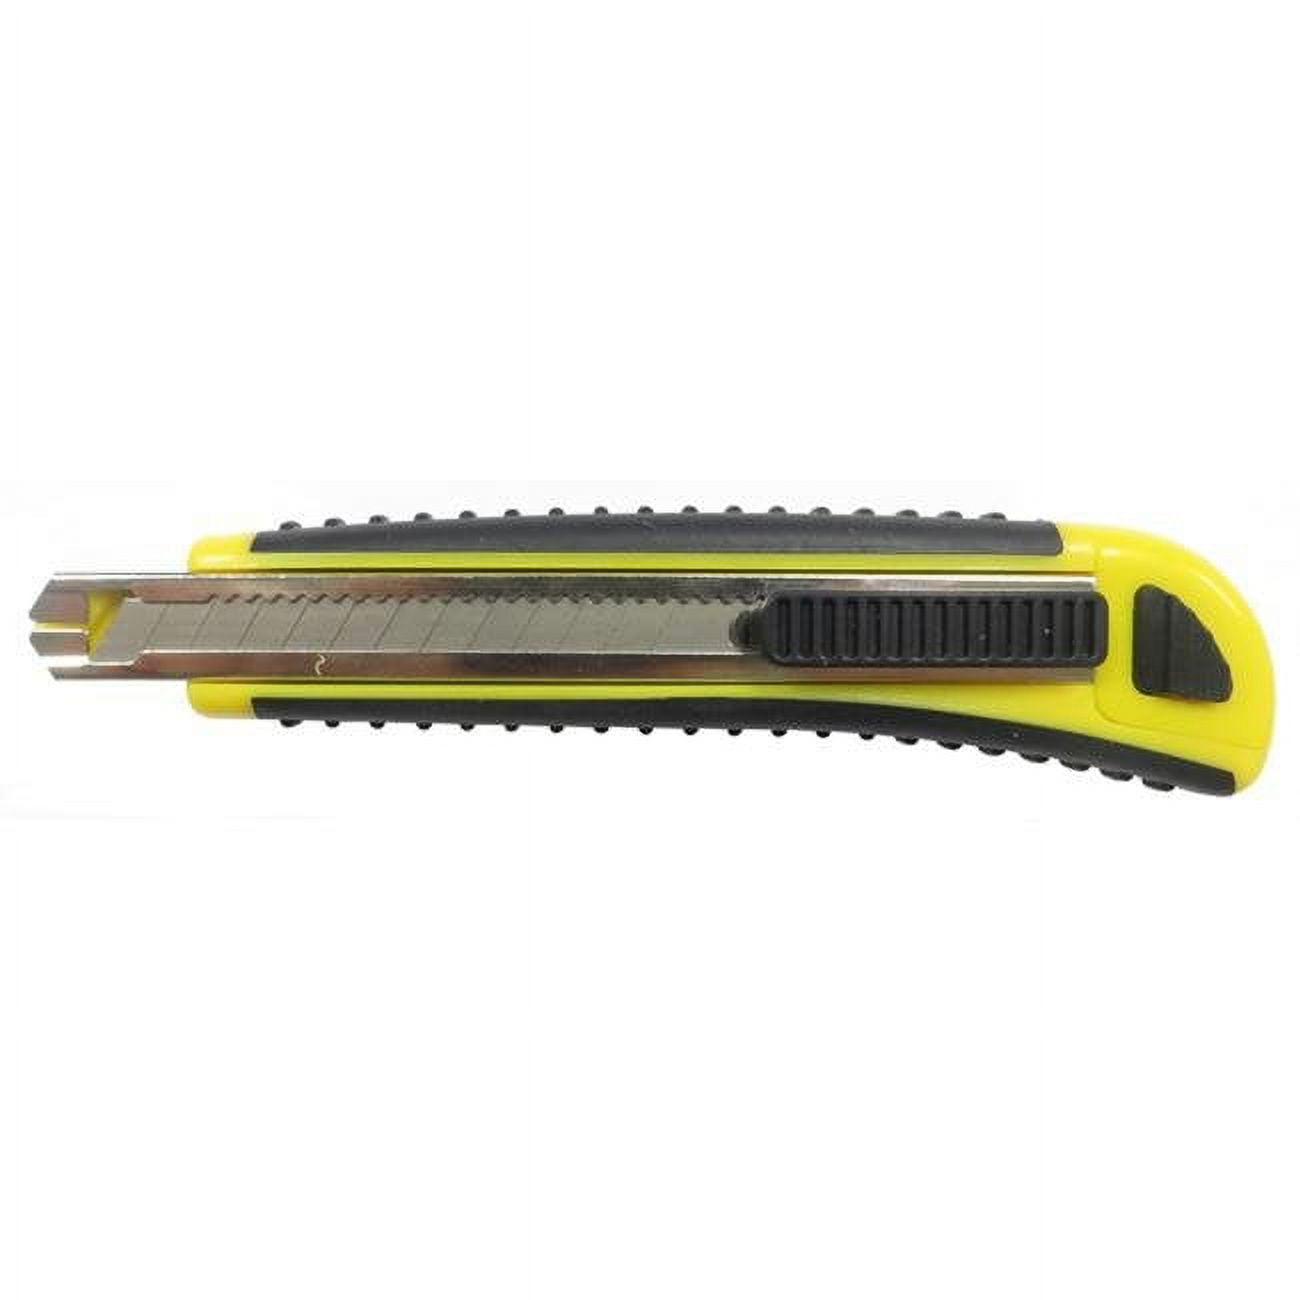 2524973 5.5 In. Auto Load Snap Knife, Yellow